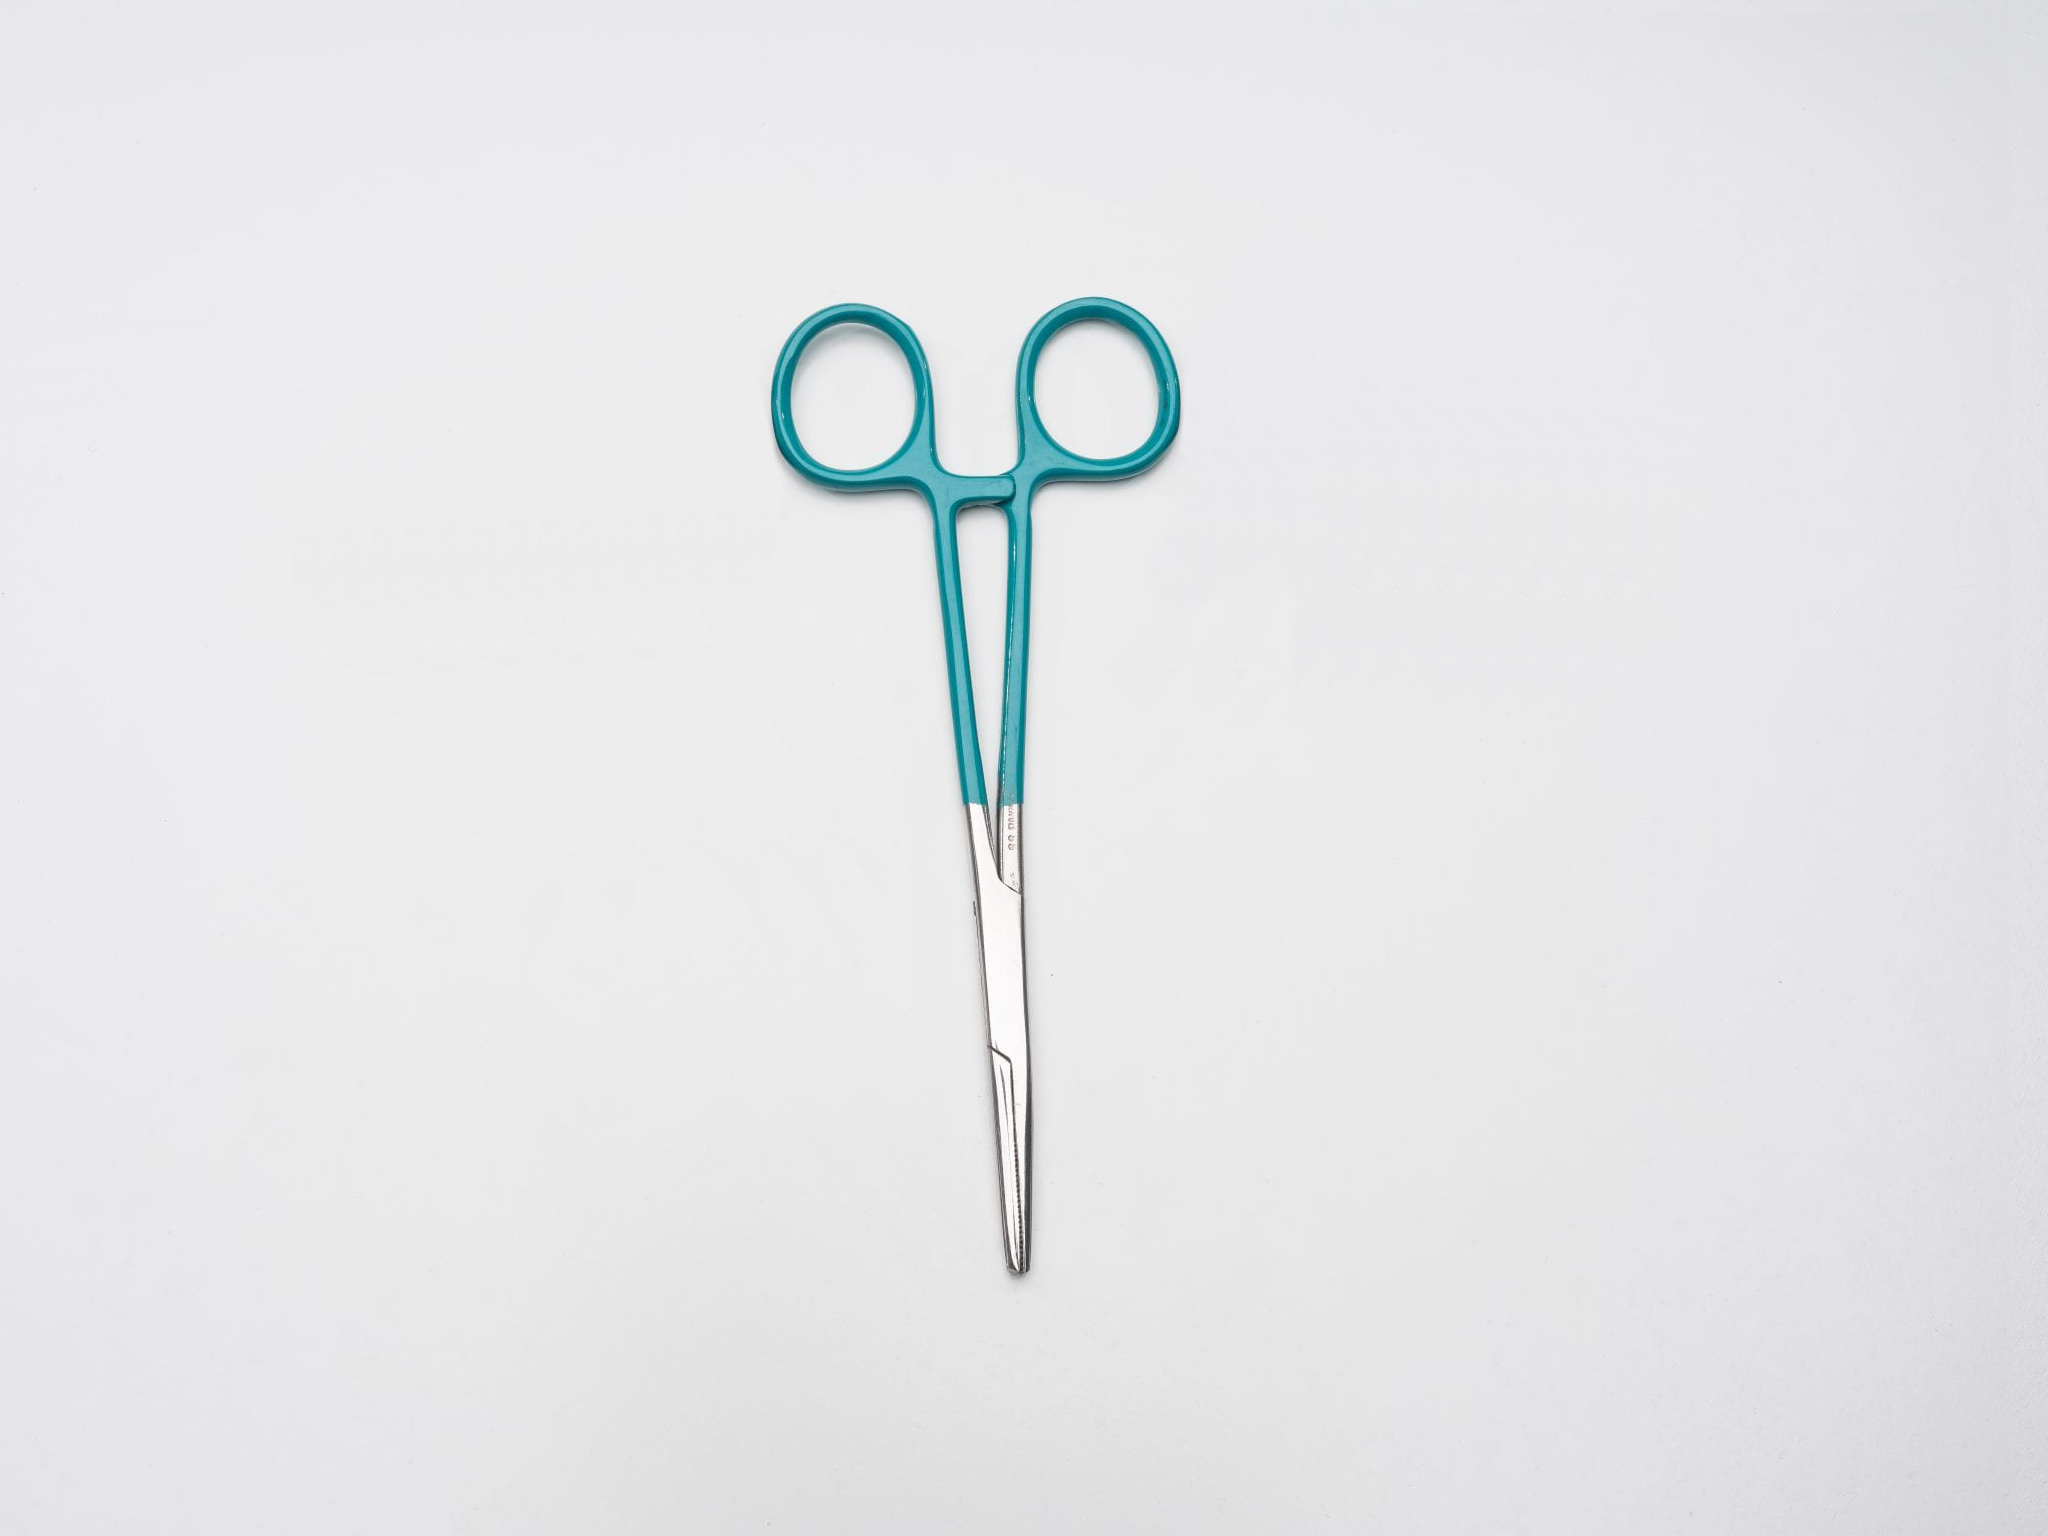 Forceps can be used to remove used single-use blades from the handle.